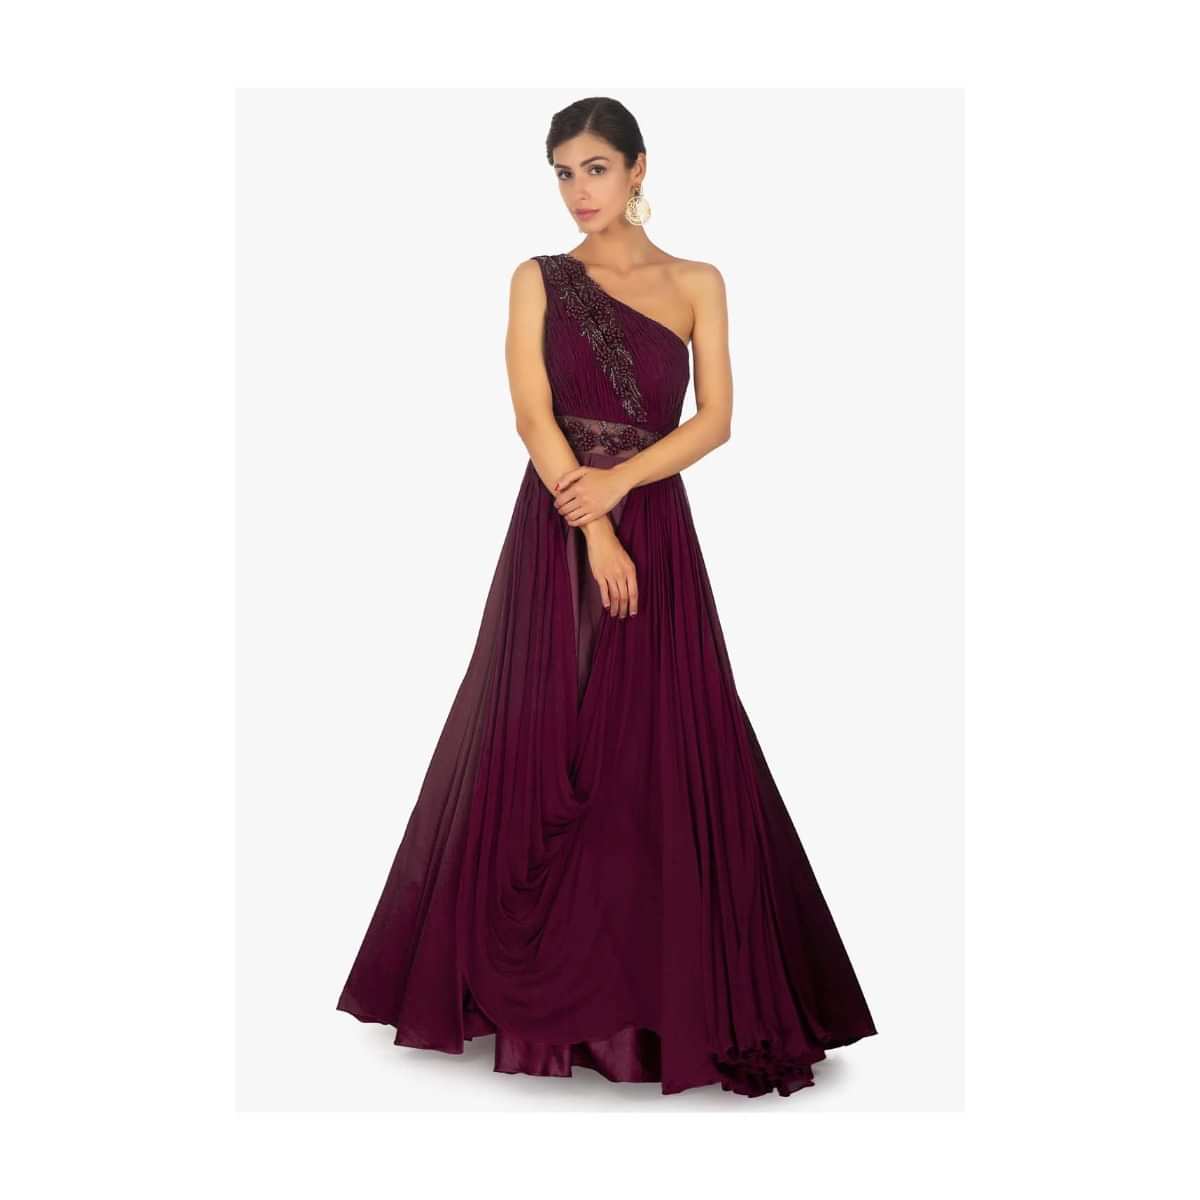 Maroon Gown In Satin With One Shoulder Neckline And Ruched Bodice Along With 3 D Potli Buttons Online - Kalki Fashion